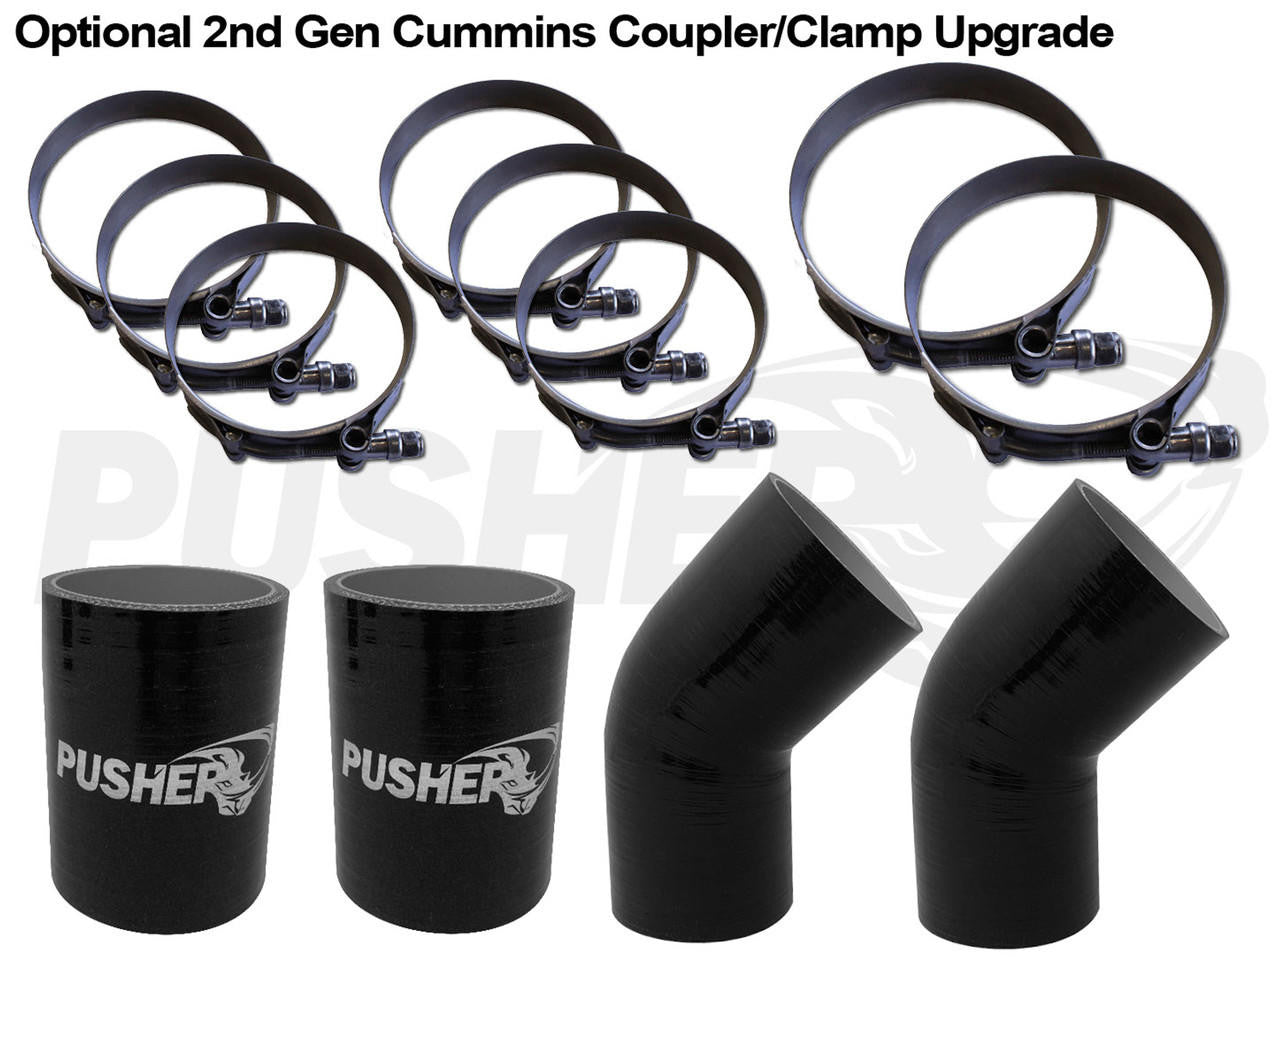 Pusher Intakes Pusher Heavy Duty Coupler/Clamp Upgrade for 1994-2002 Dodge Cummins Trucks PDC9402CCU 